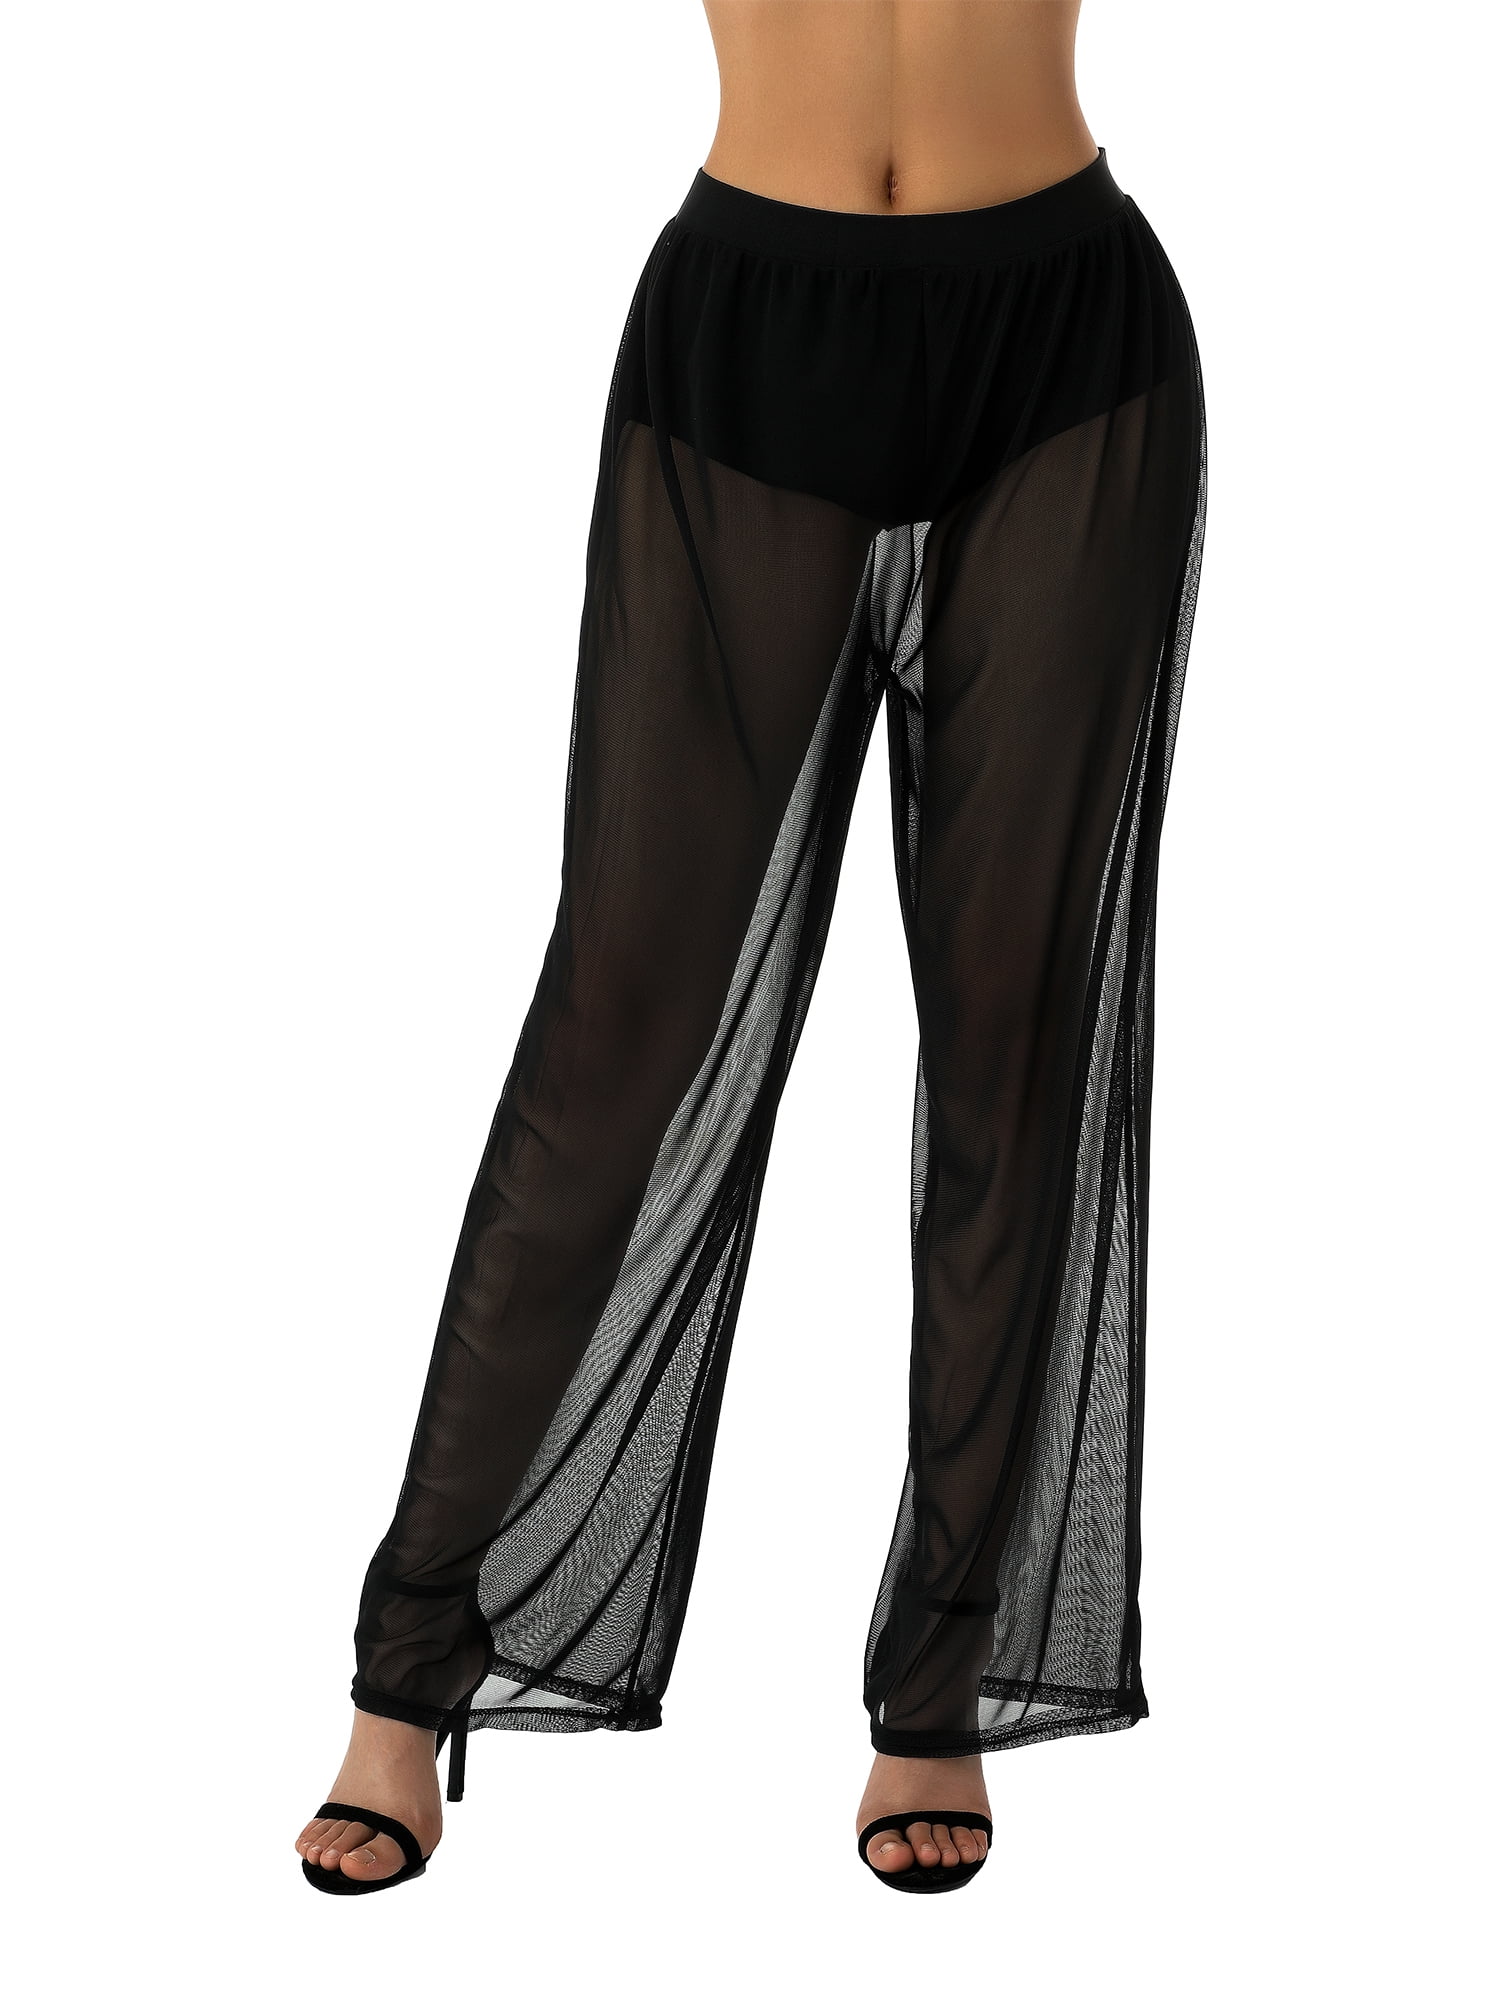 Away On A Yacht Mesh Cover Up Pants in Black • Impressions Online Boutique